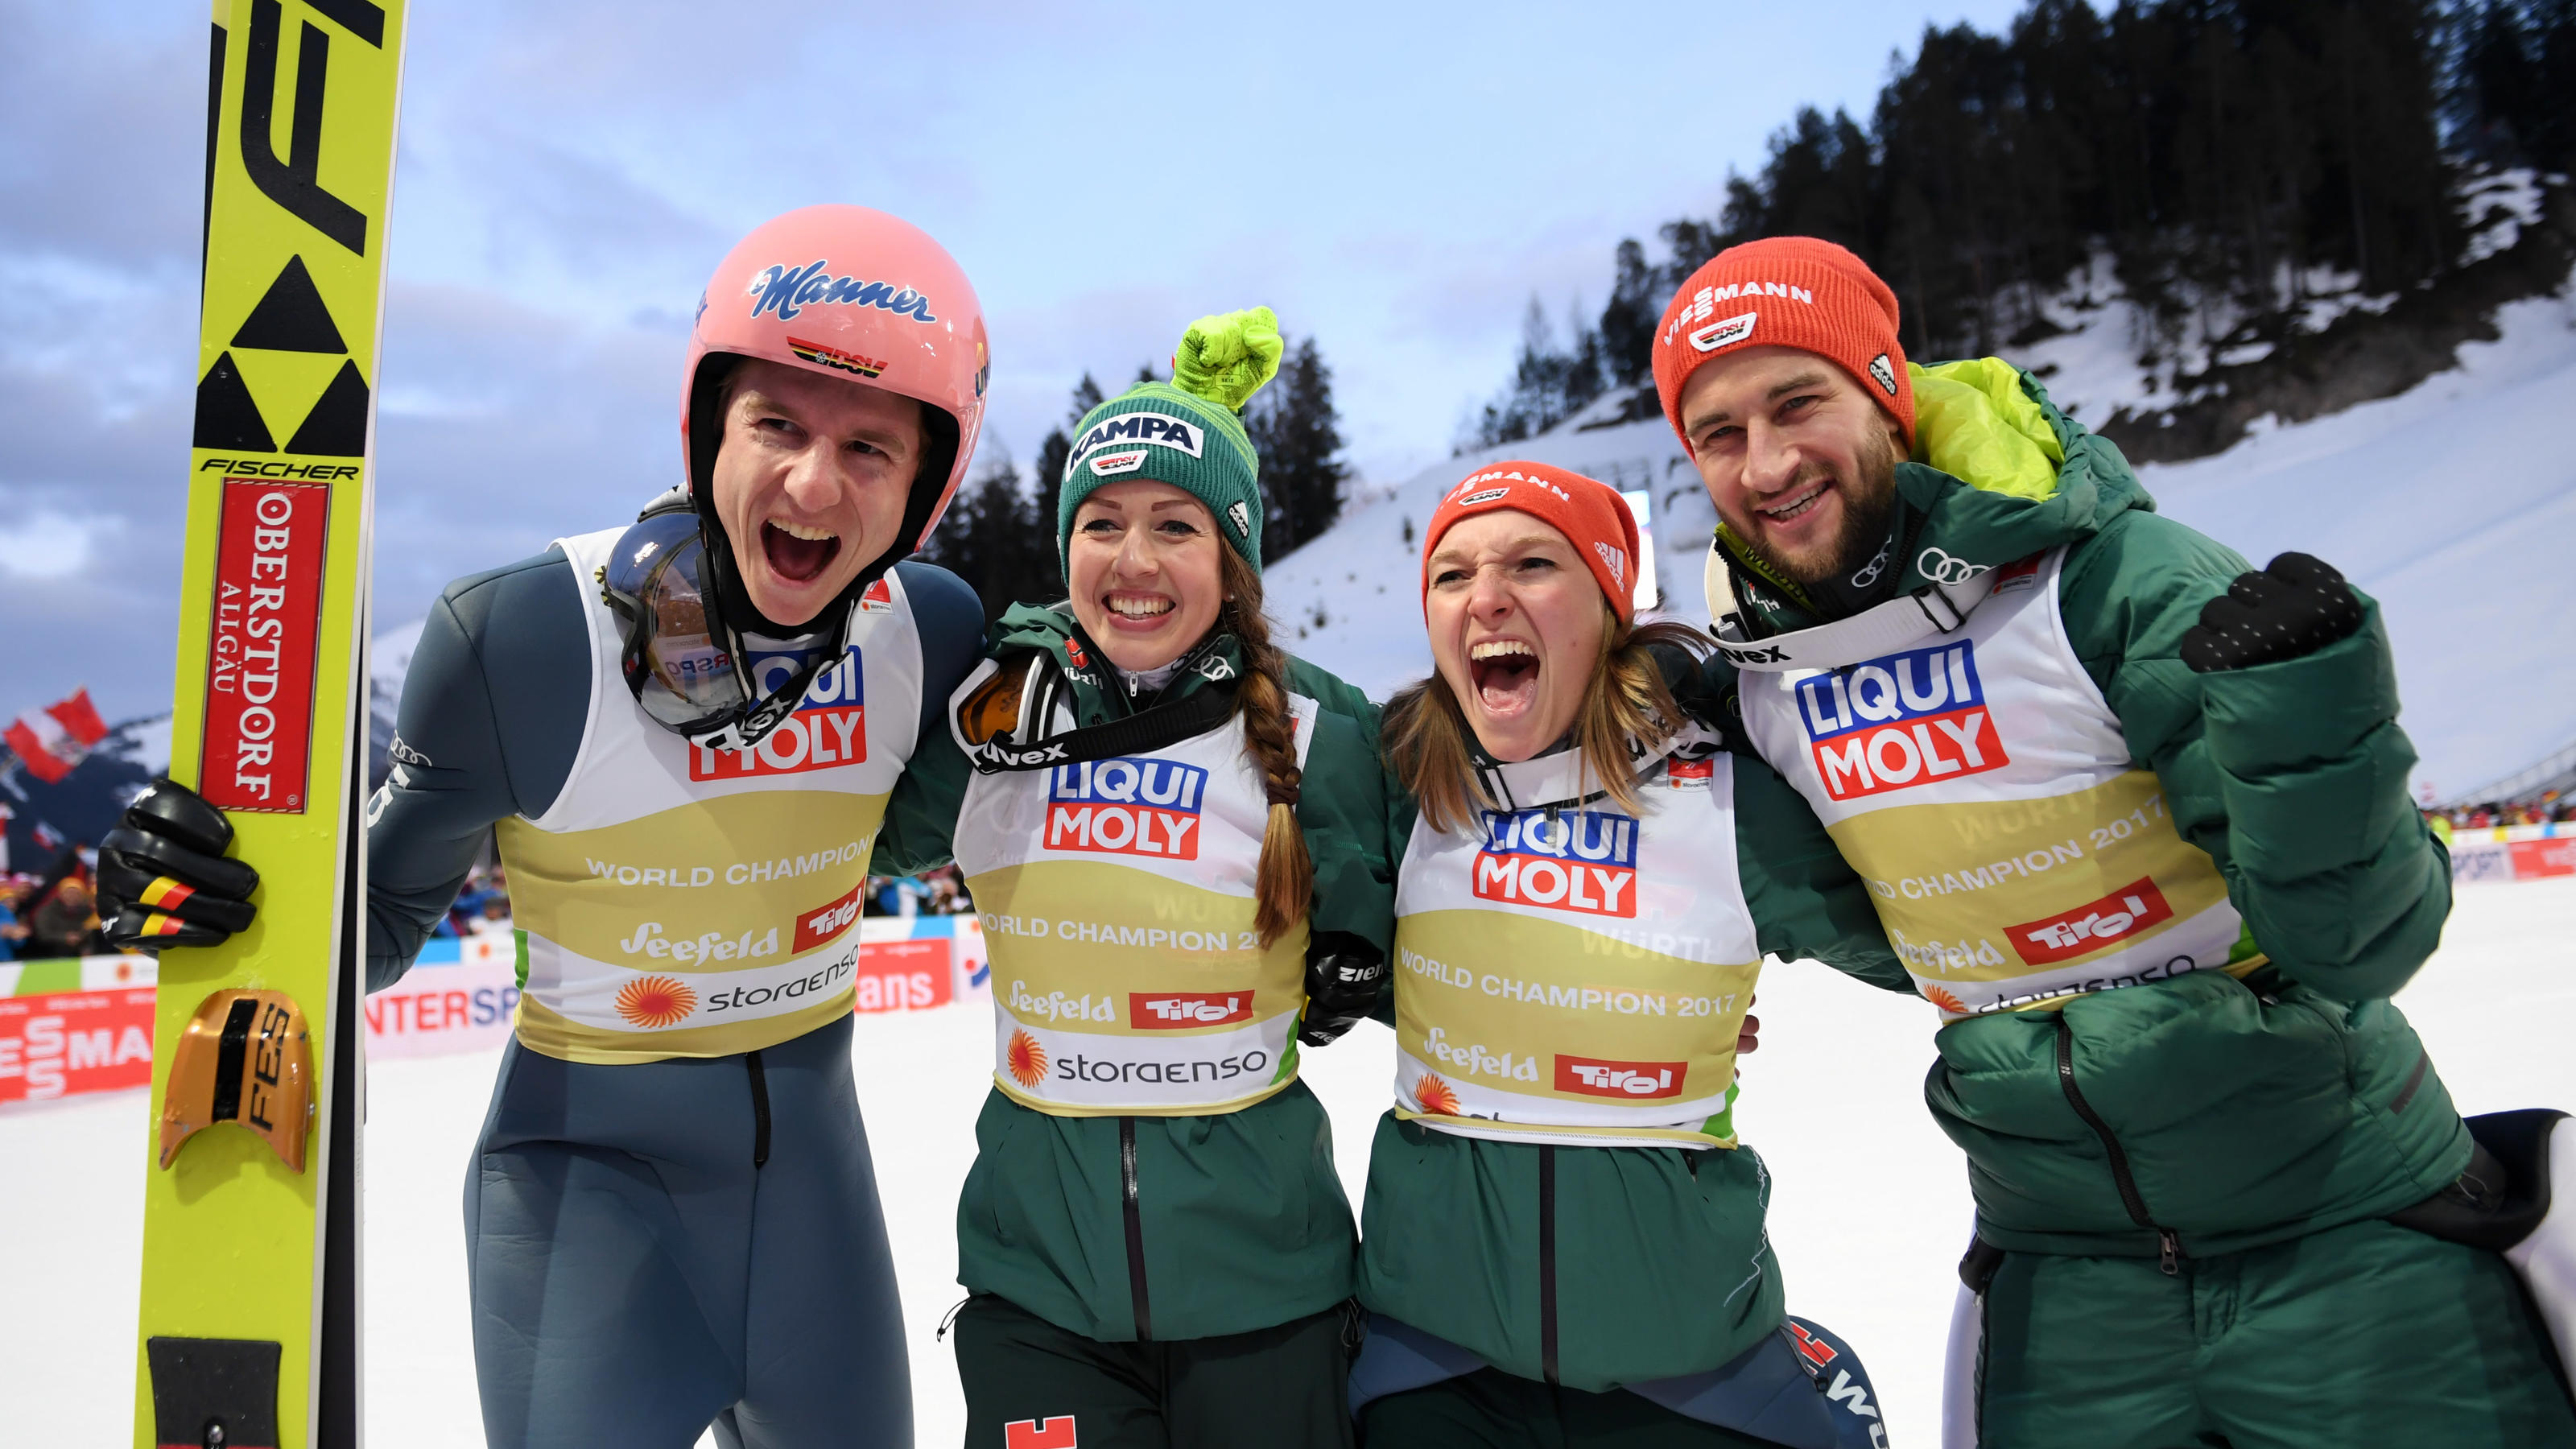 SEEFELD, AUSTRIA - MARCH 02: Karl Geiger of Germany, Katharina Althaus of Germany, Markus Eisenbichler of Germany and Juliane Seyfarth of Germany celebrates following their victory in the Mixed Team Ski Jumping HS109 competition during the FIS Nordic